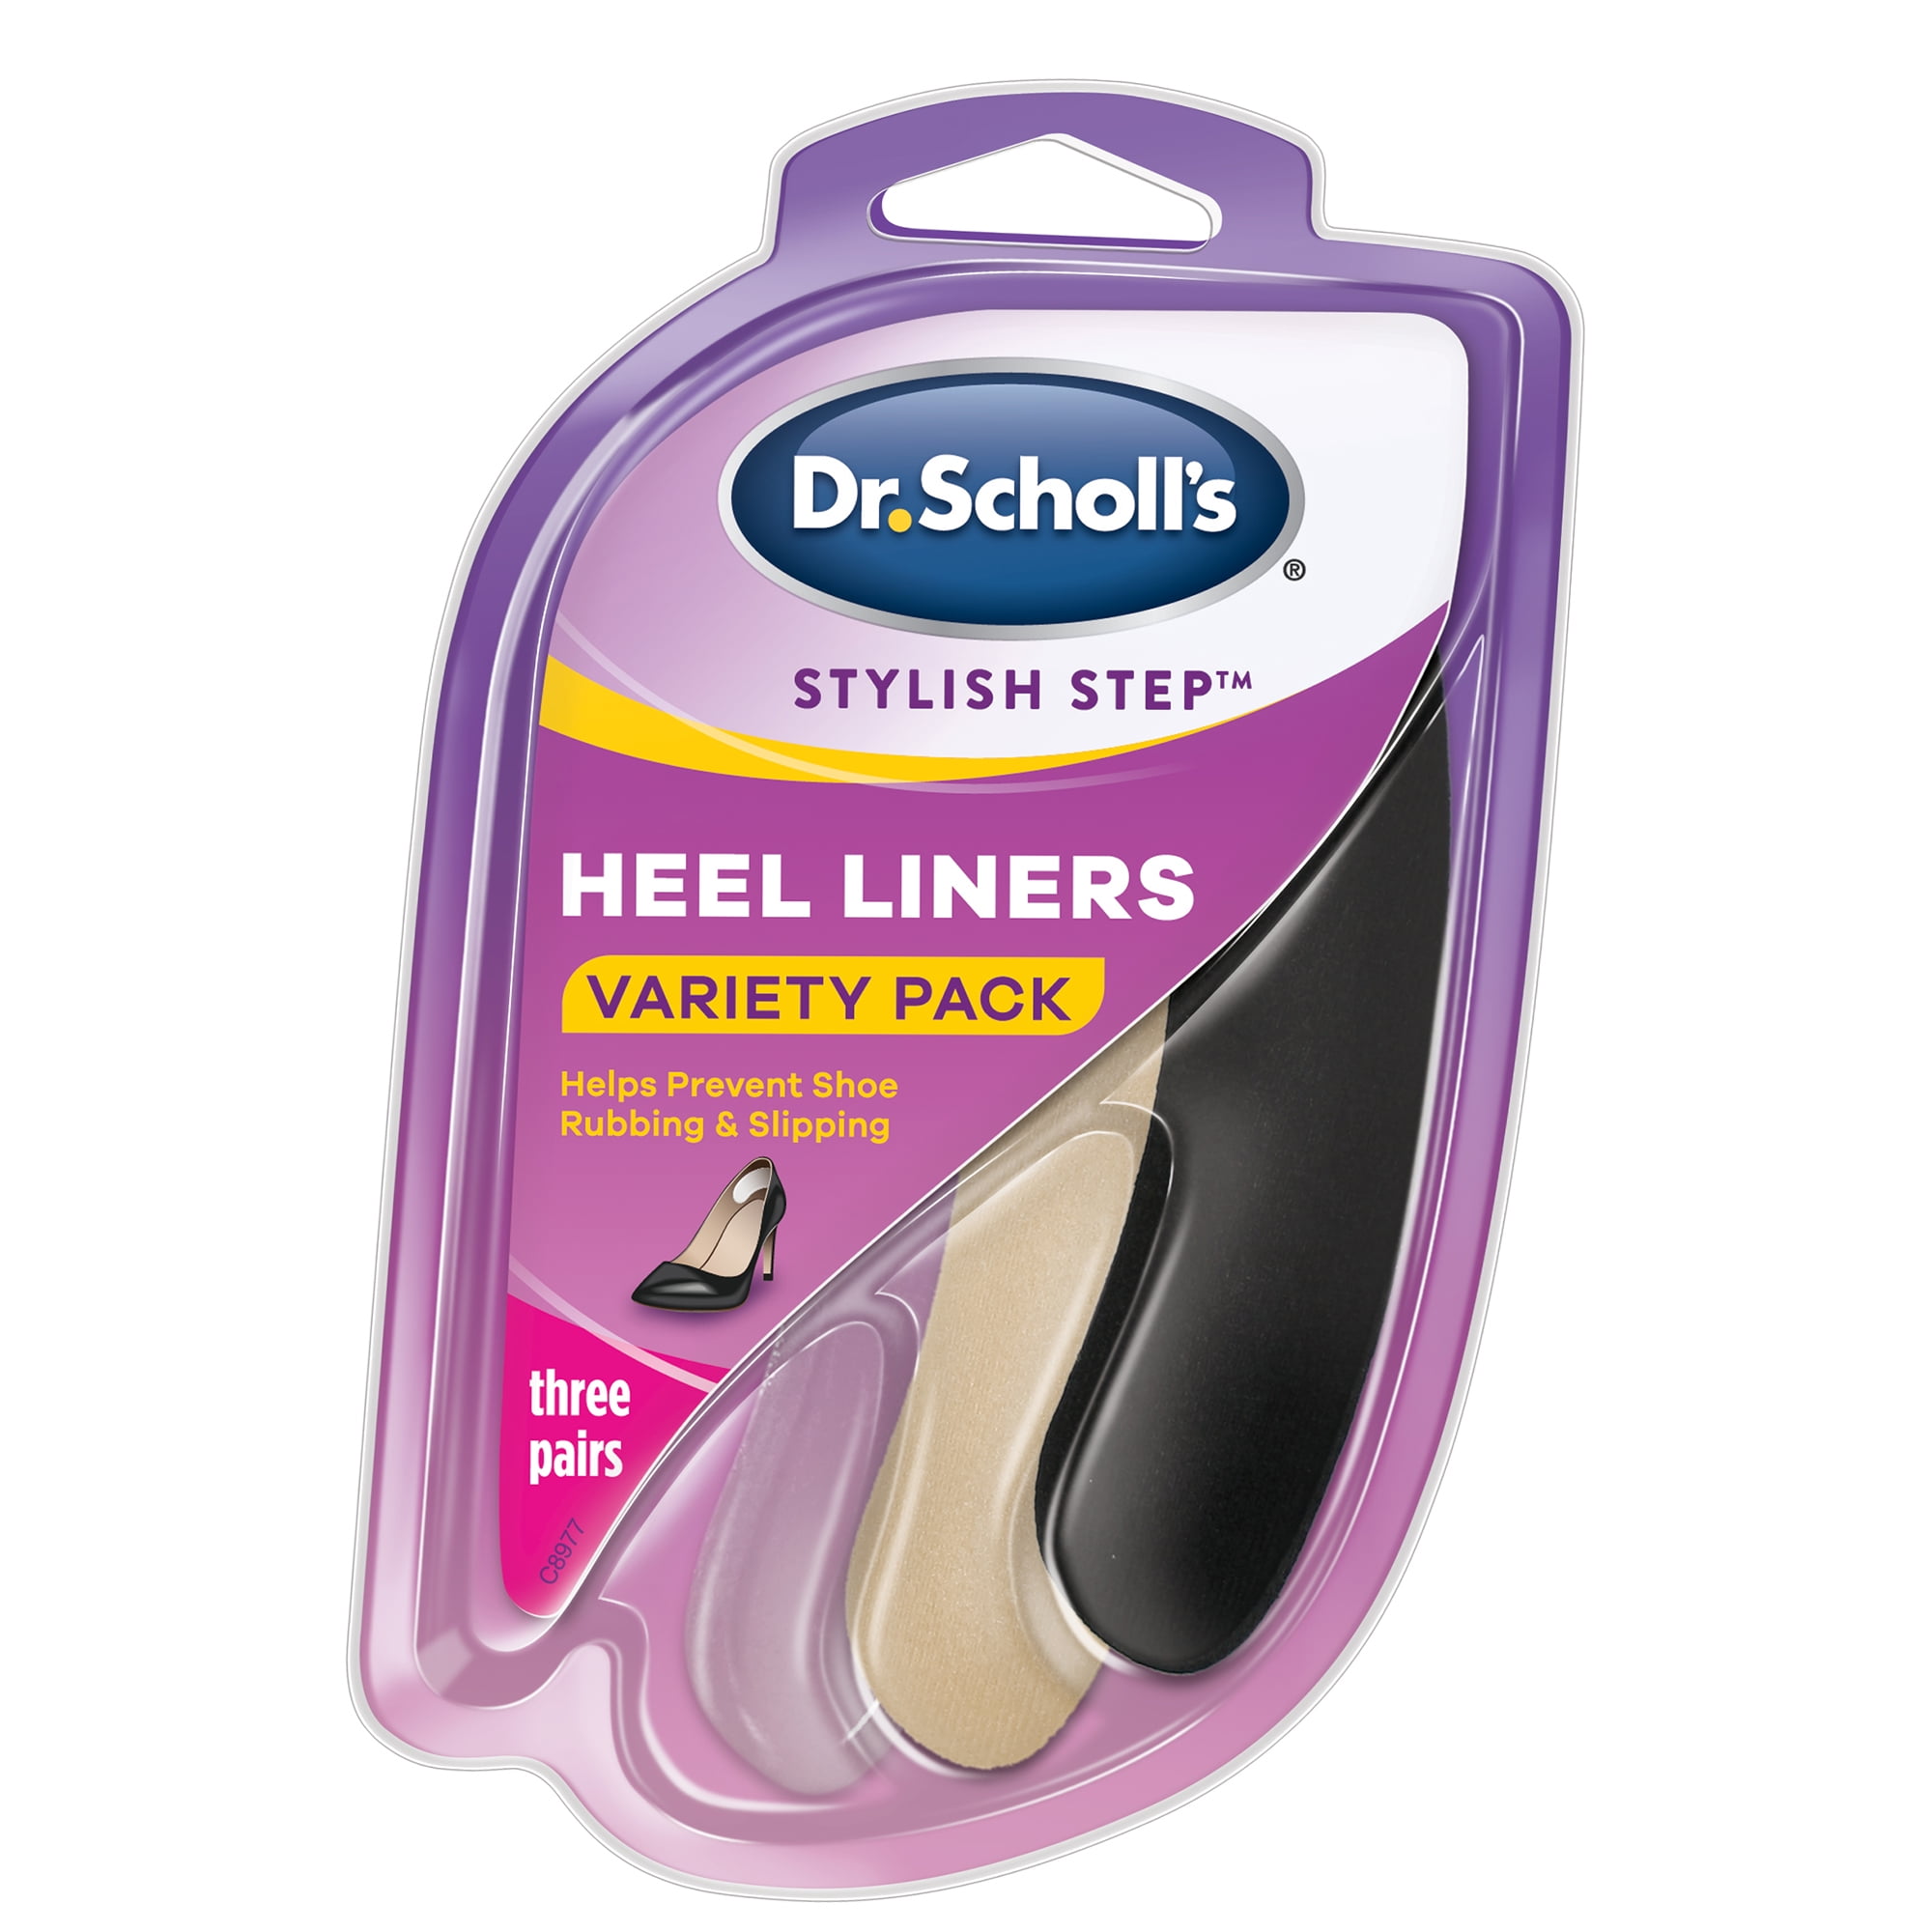 Dr. Scholl's Heel Liners Variety Pack (3 Pair) Help Prevent Shoe Rubbing and Shoe Slipping - Walmart.com